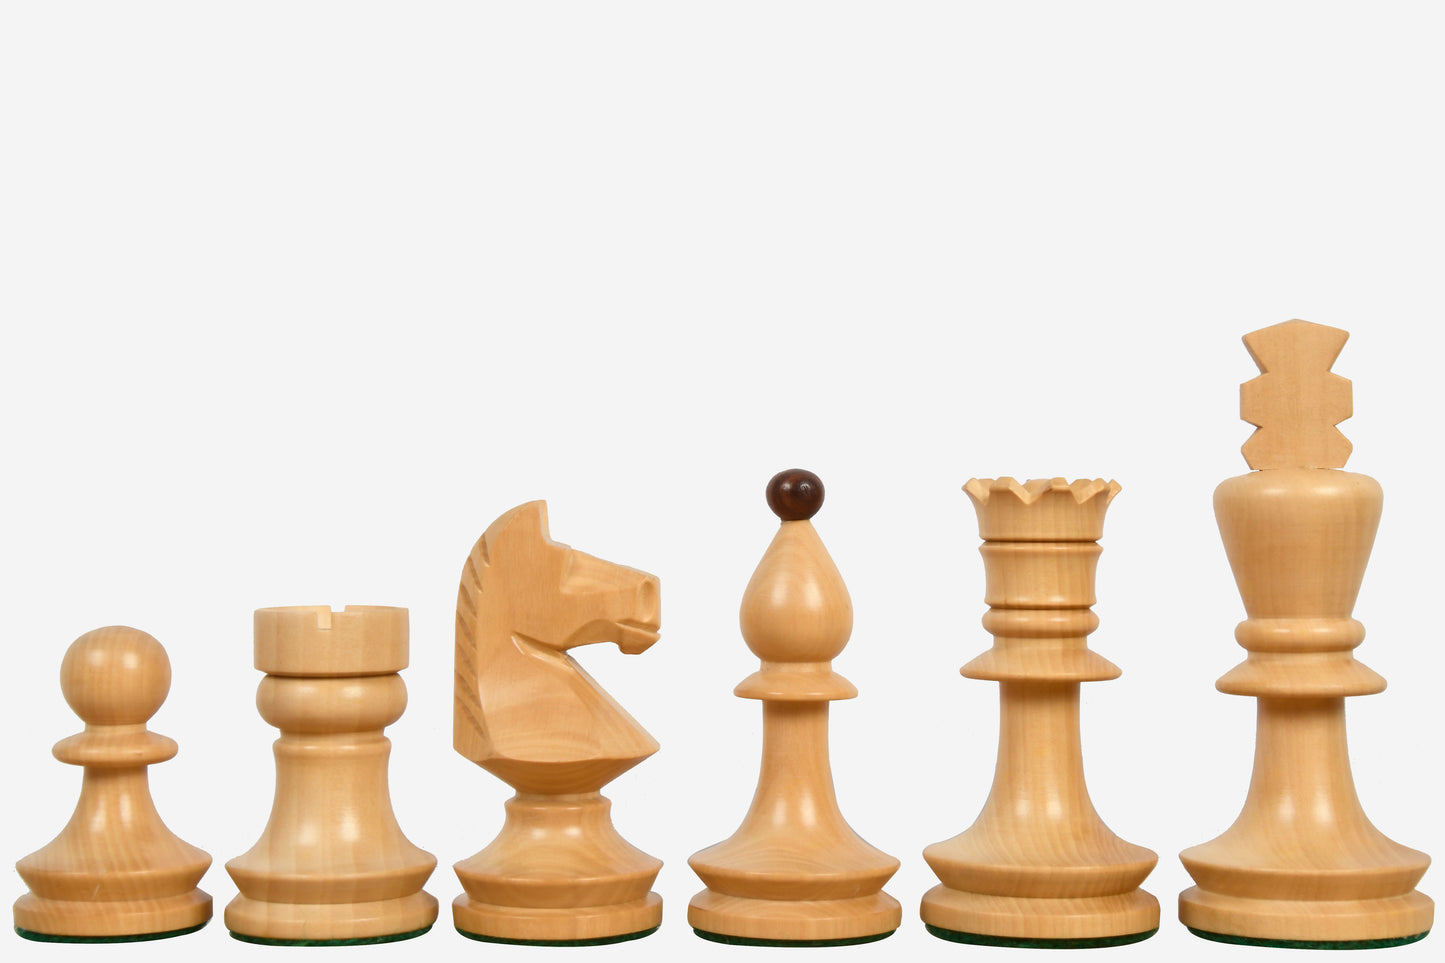 Reproduced Romanian-Hungarian National Tournament Weighted Chess Pieces in Indian Rosewood & Natural Boxwood - 3.8" King